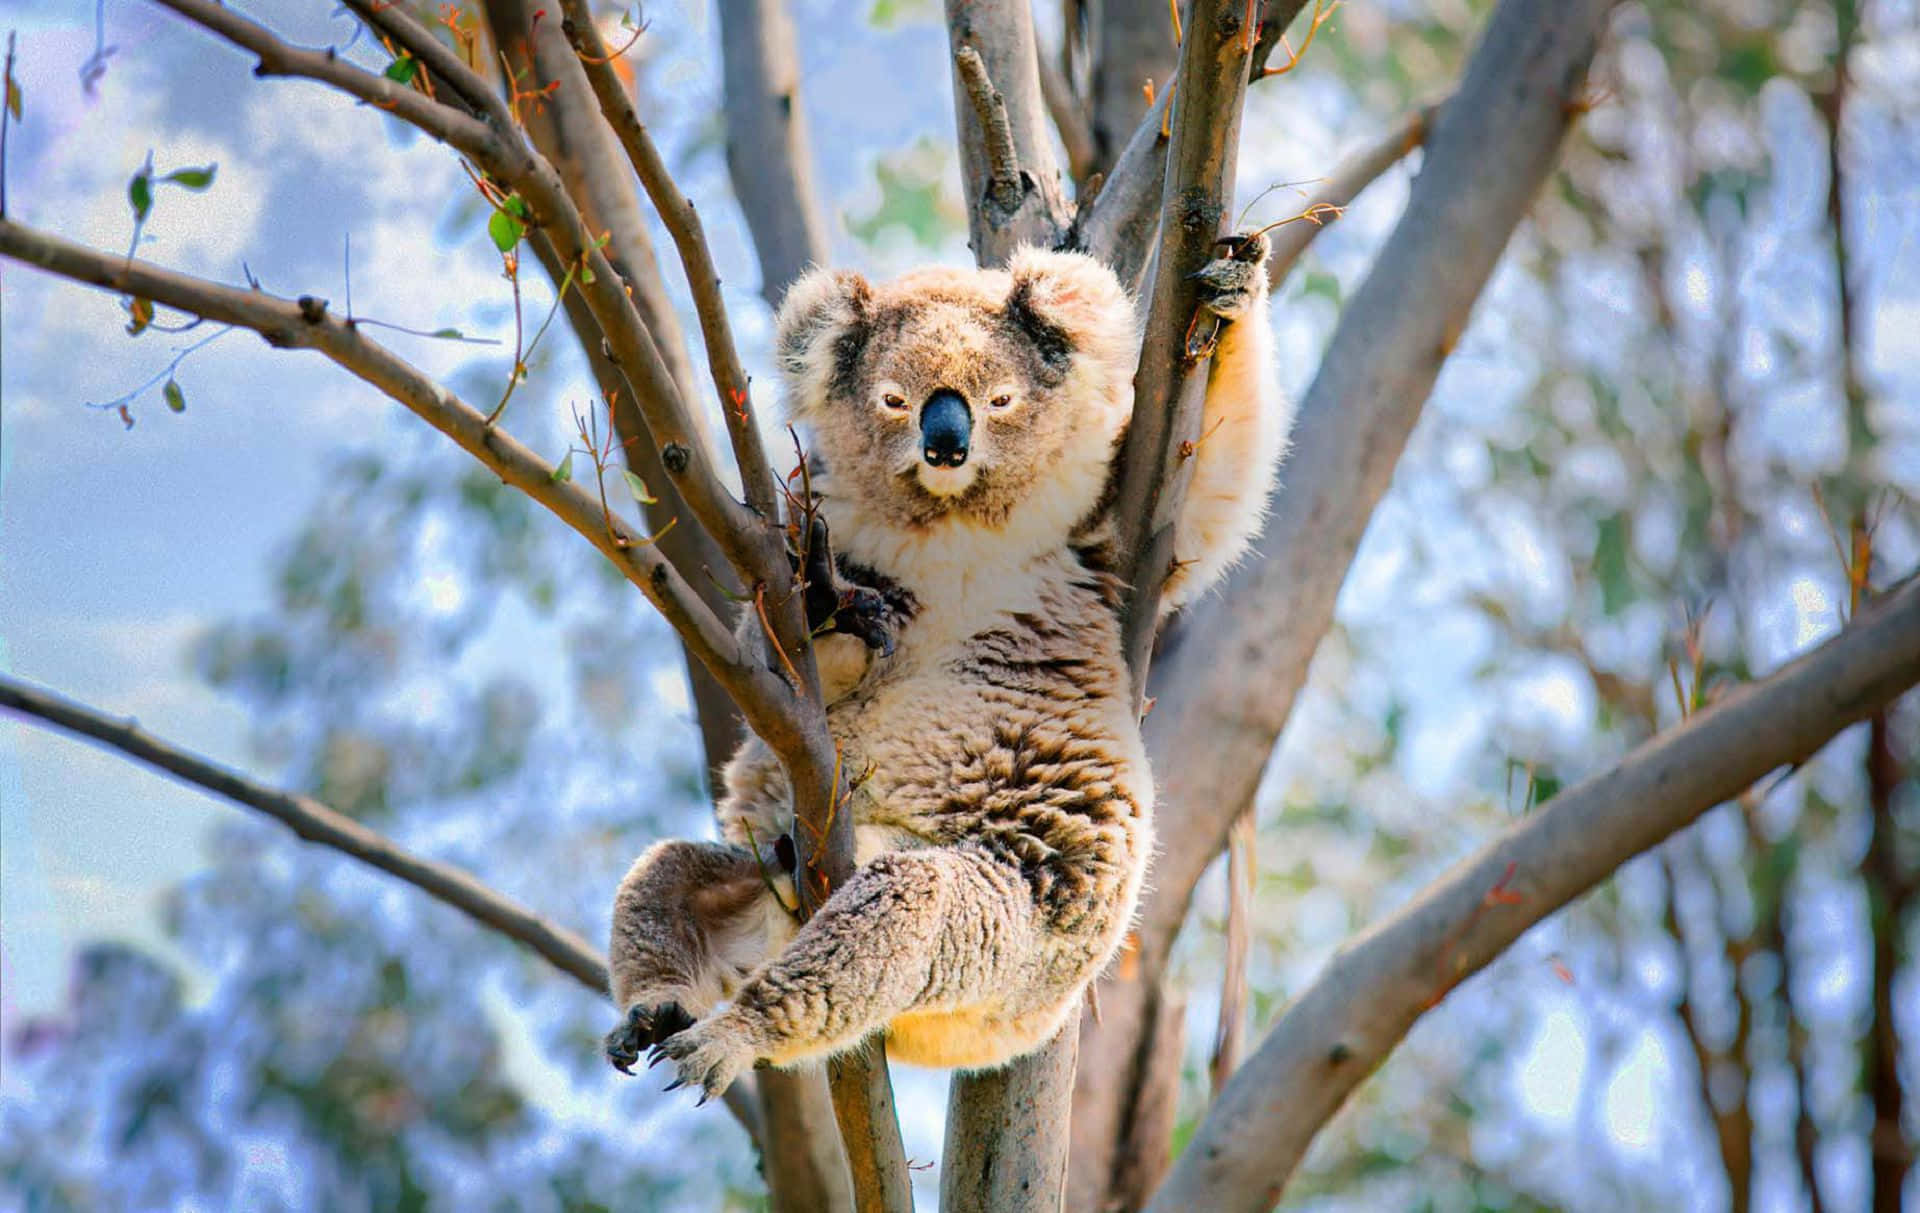 Being a Koala is All About Taking Time to Relax